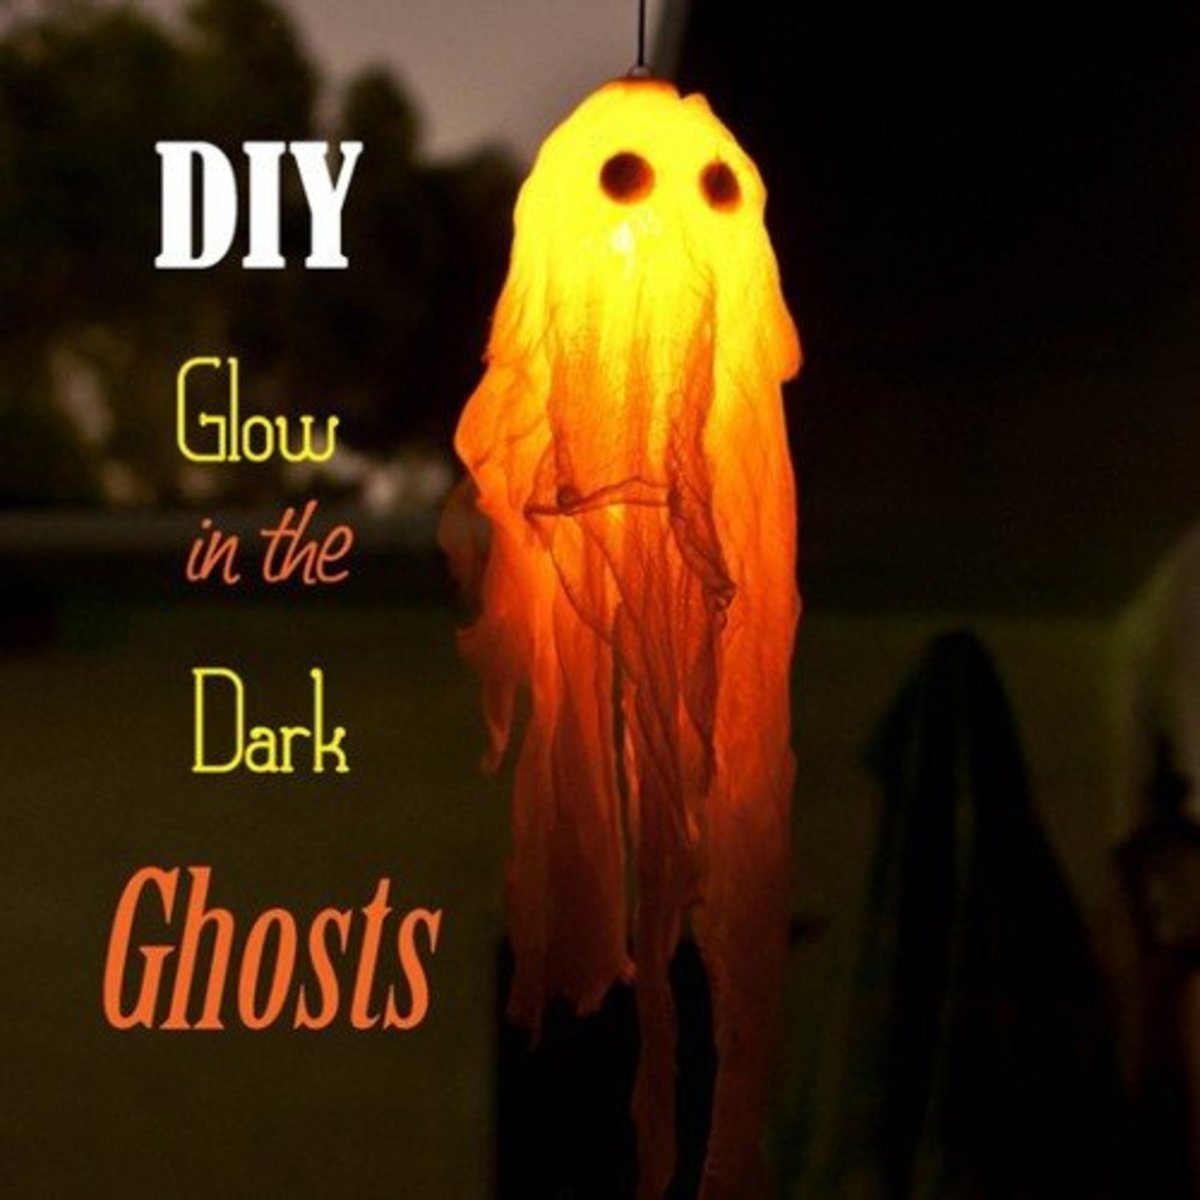 31 Best Ghostly Ghost Crafts